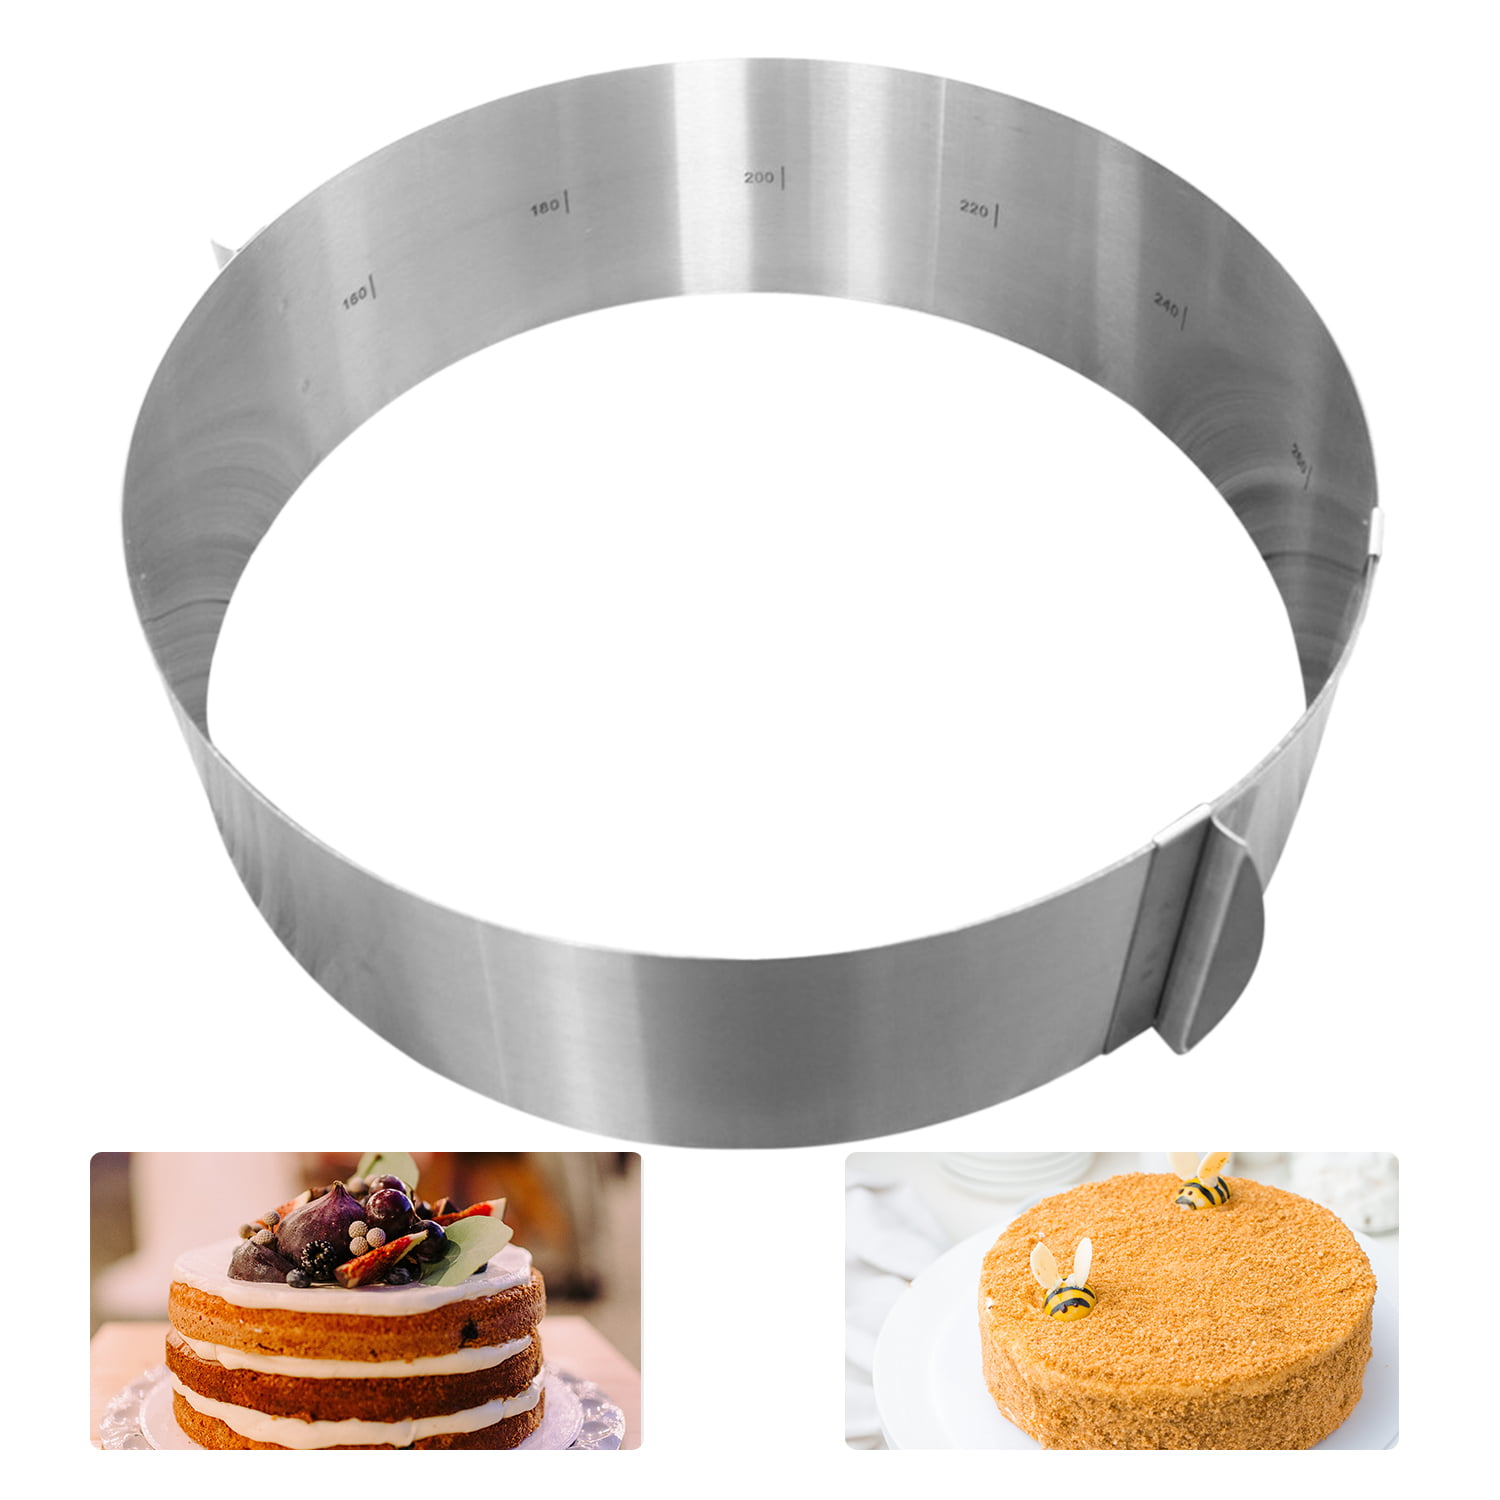 Stainless Steel 6~12 Inch Adjustable Cake Ring Cake Baking Mold Decorating Tools 